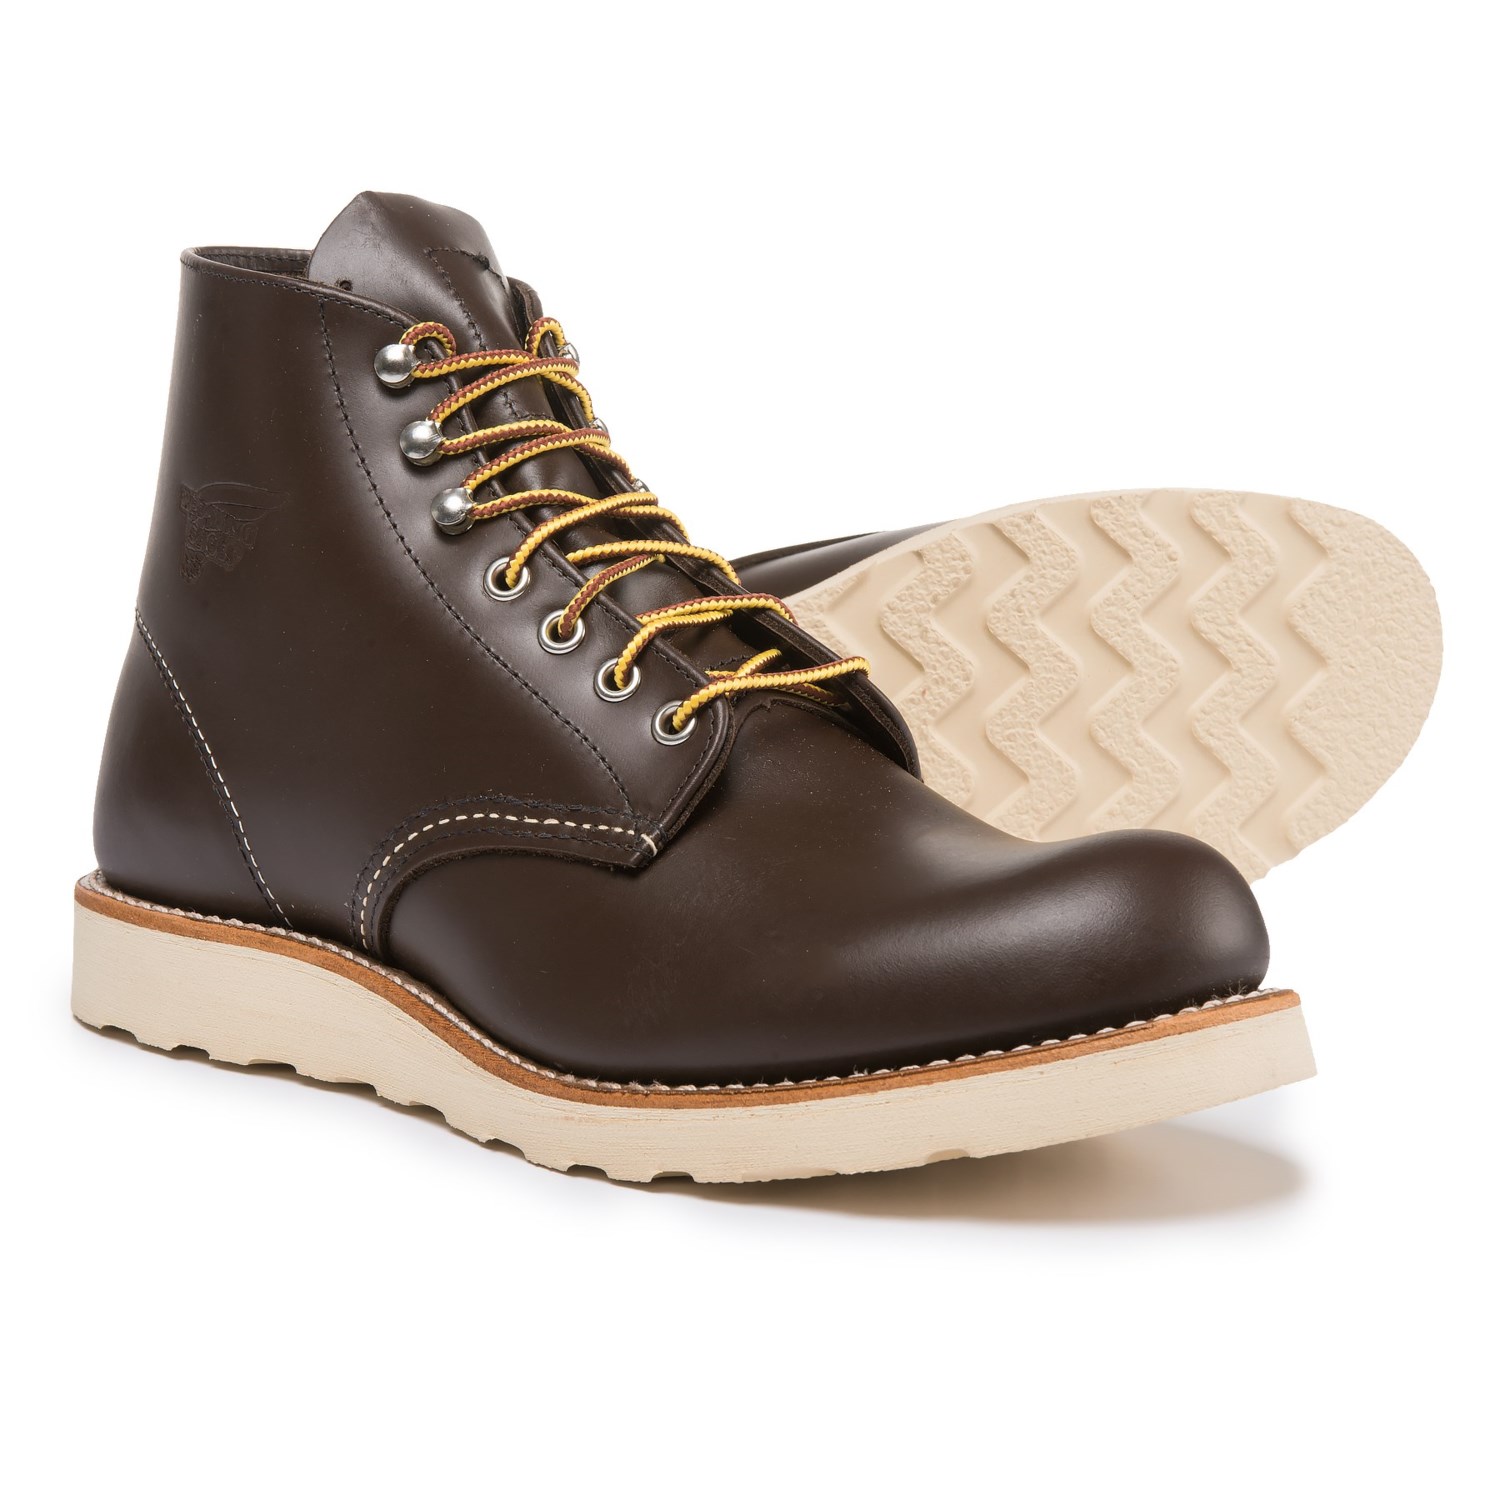 Red Wing Shoes Classic Round Toe Boots (For Men) - Save 35%